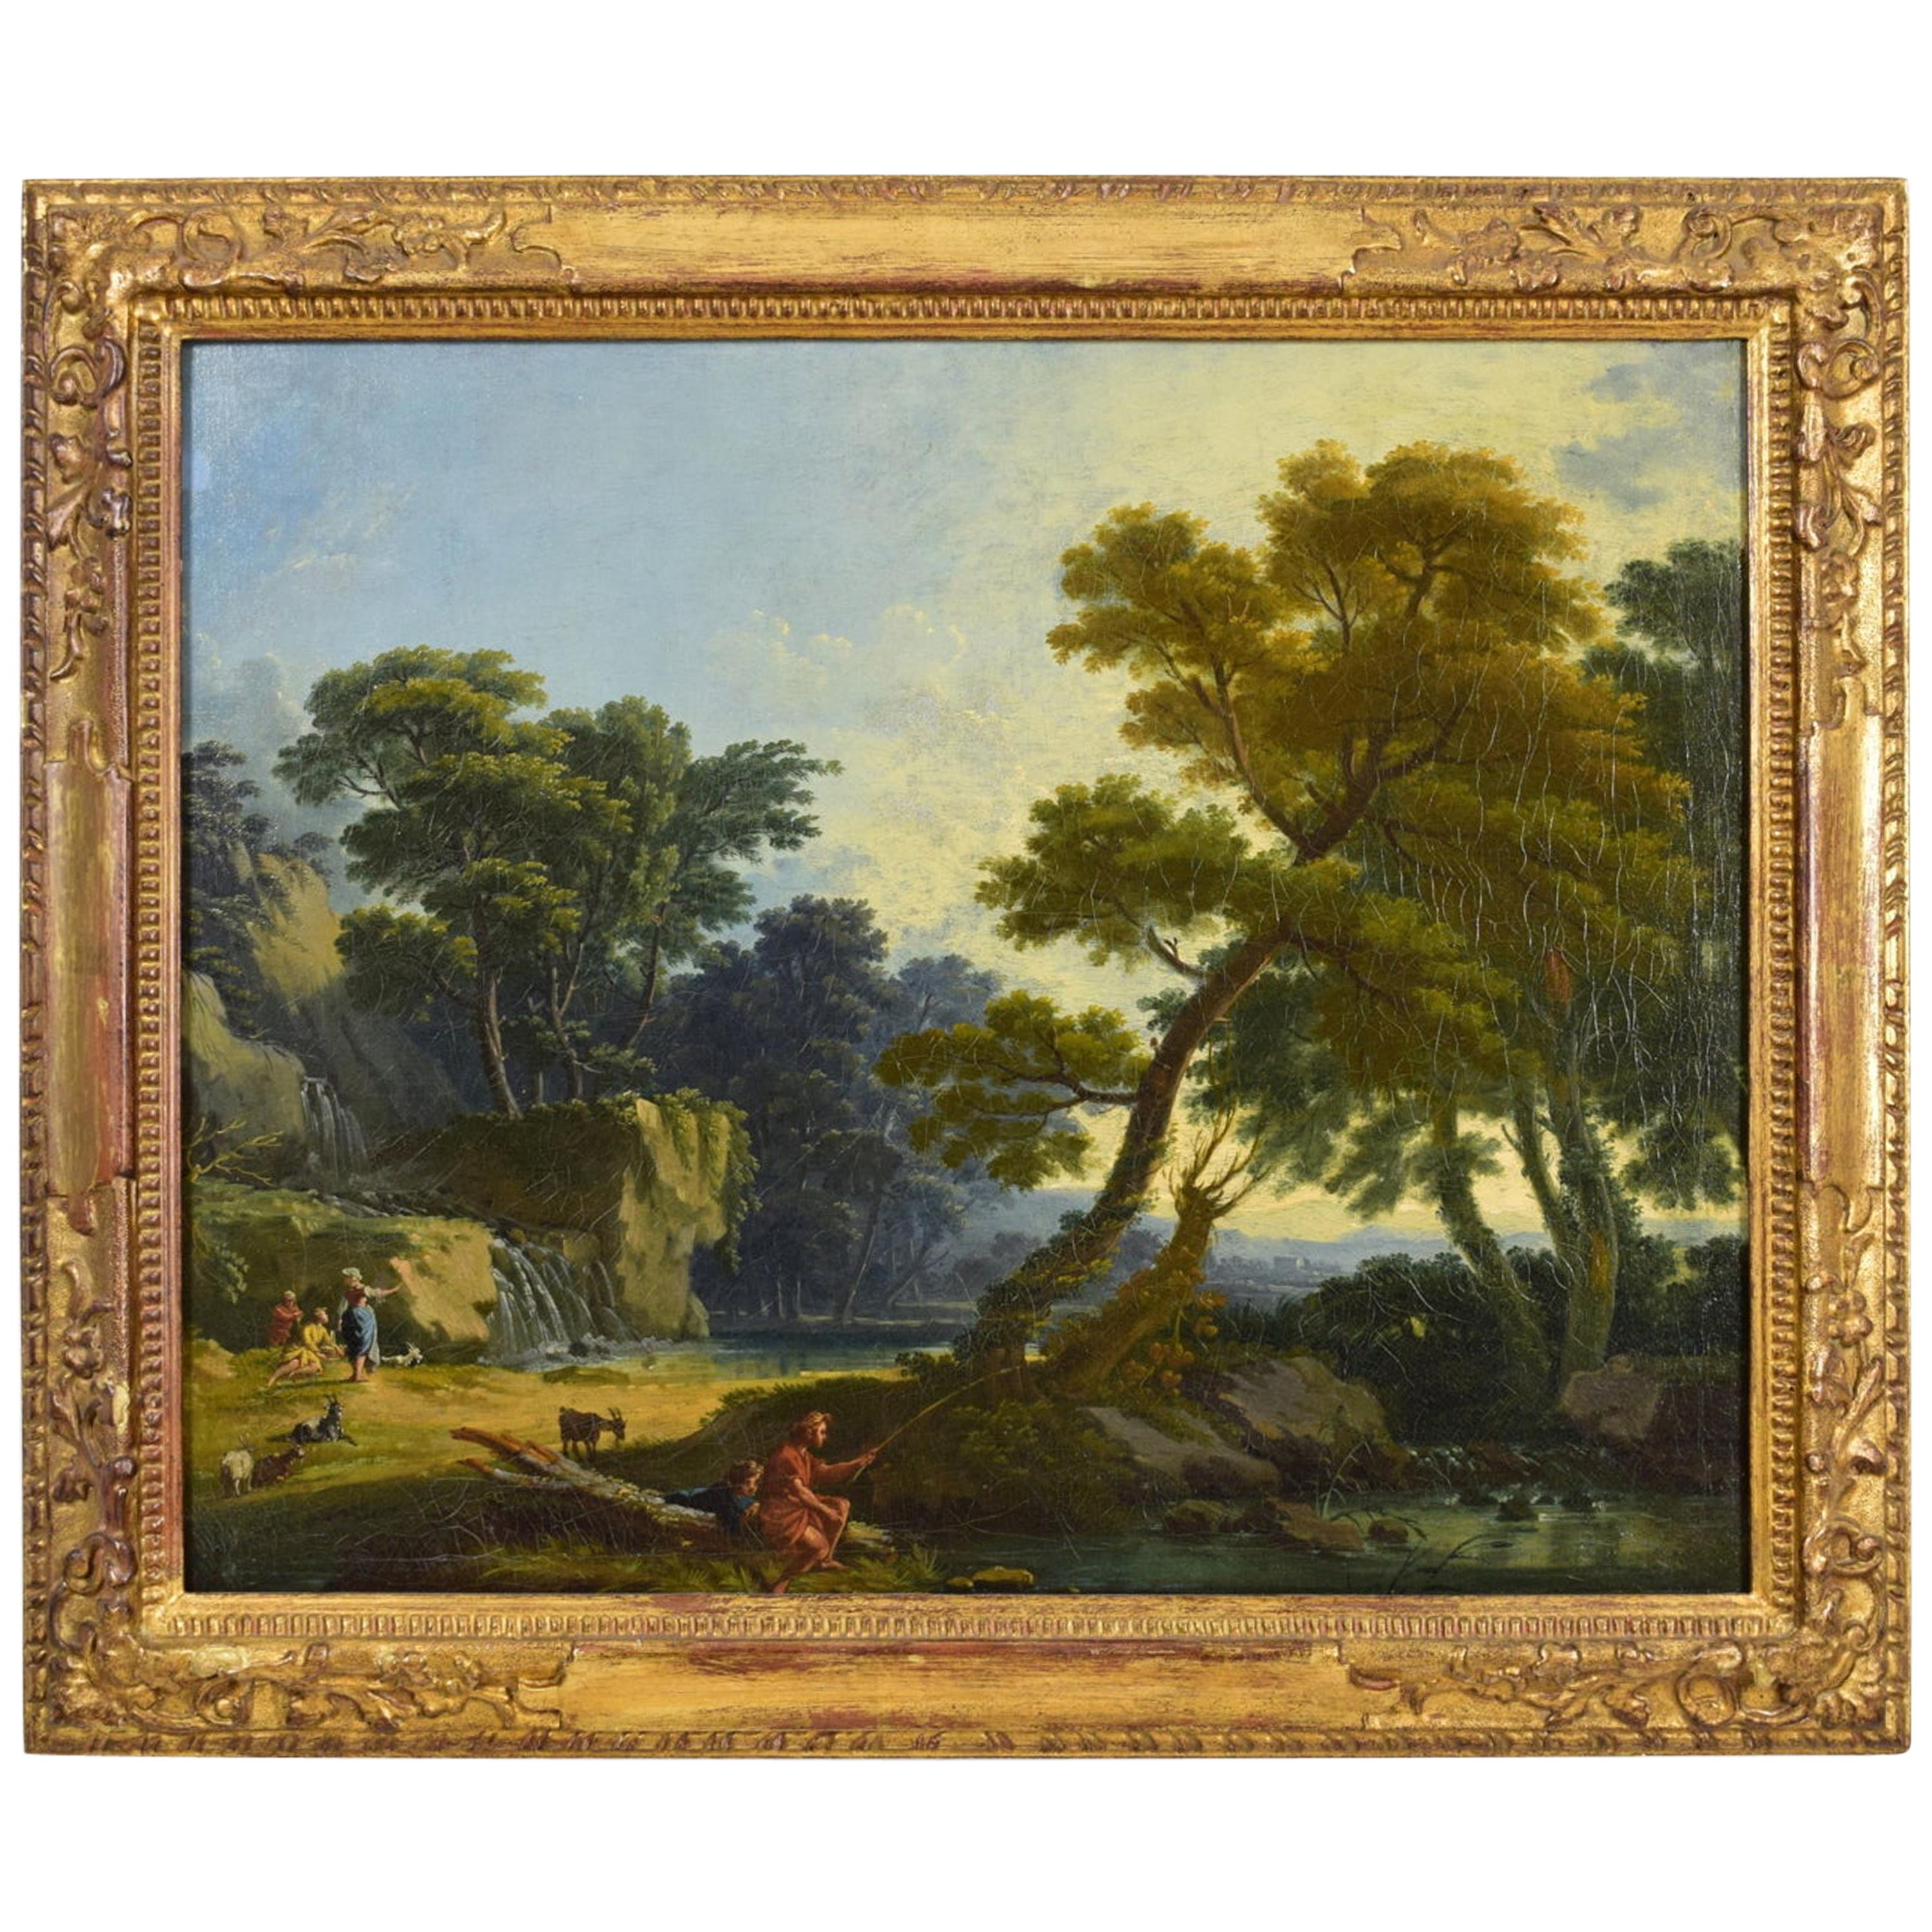 Giuseppe Zocchi 'Attributed' Oil on Canvas, Landscape with Figures